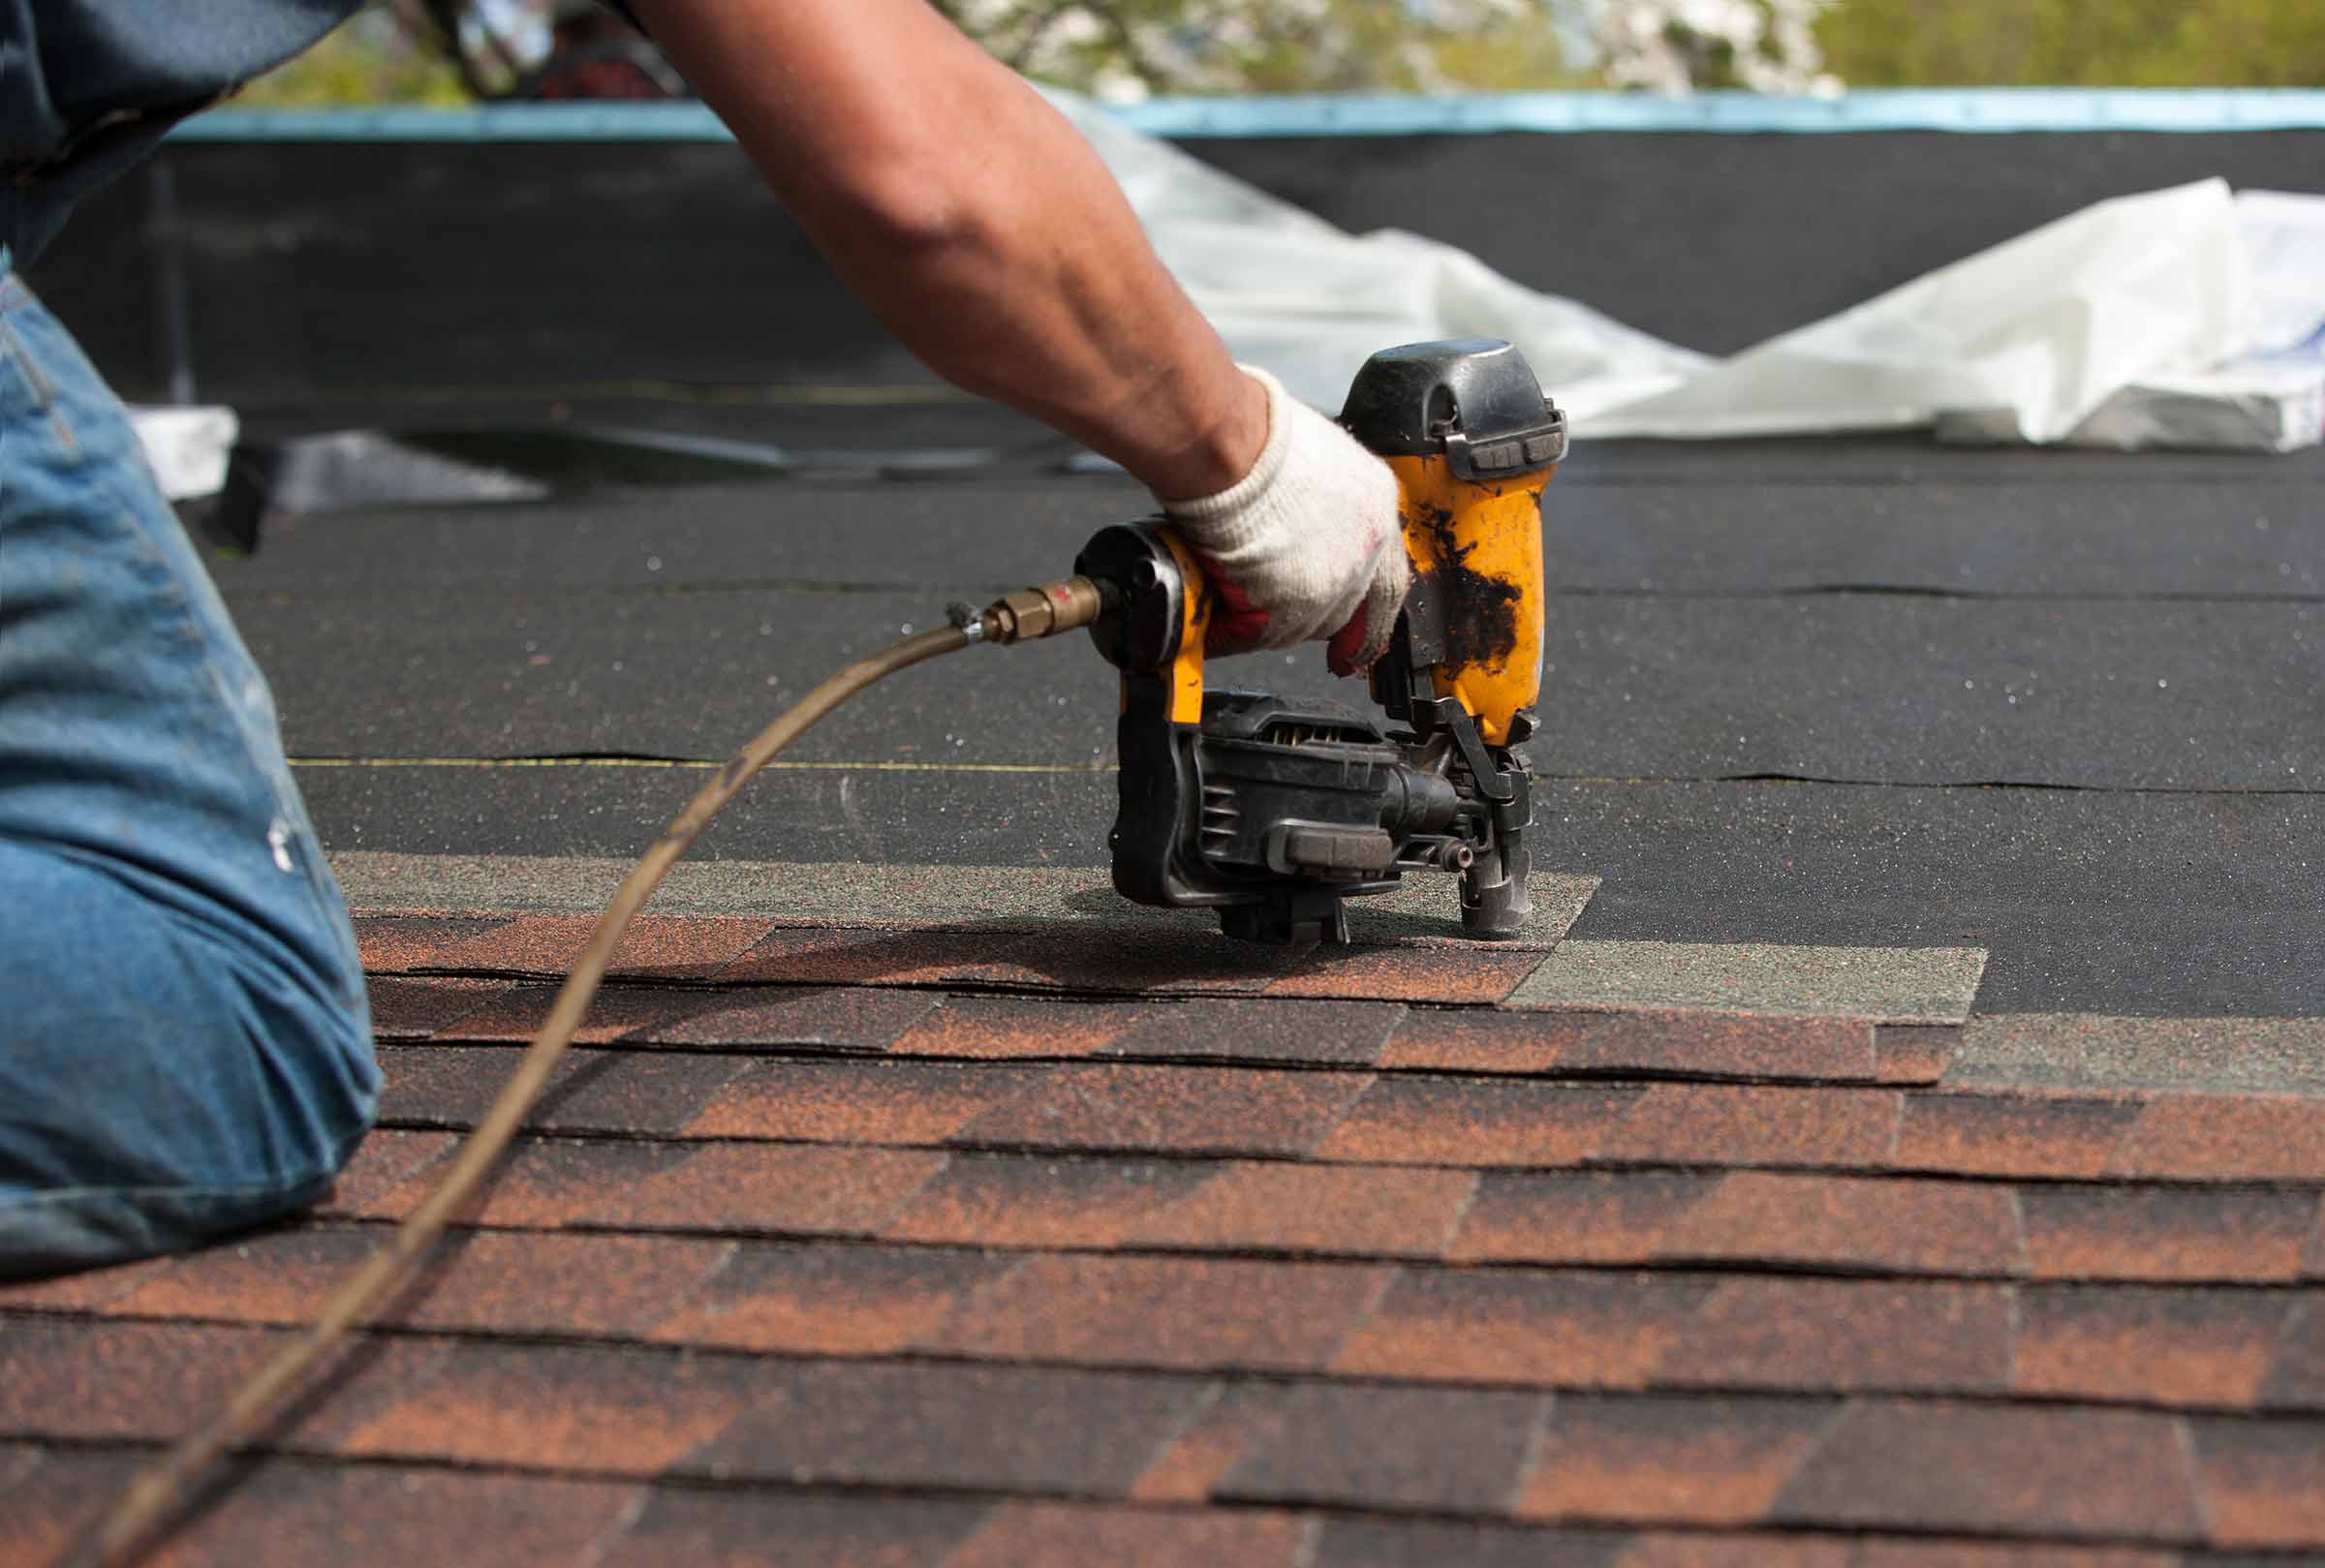 Adding Insulation For Your Roof Doesn't Have to be Expensive or Difficult